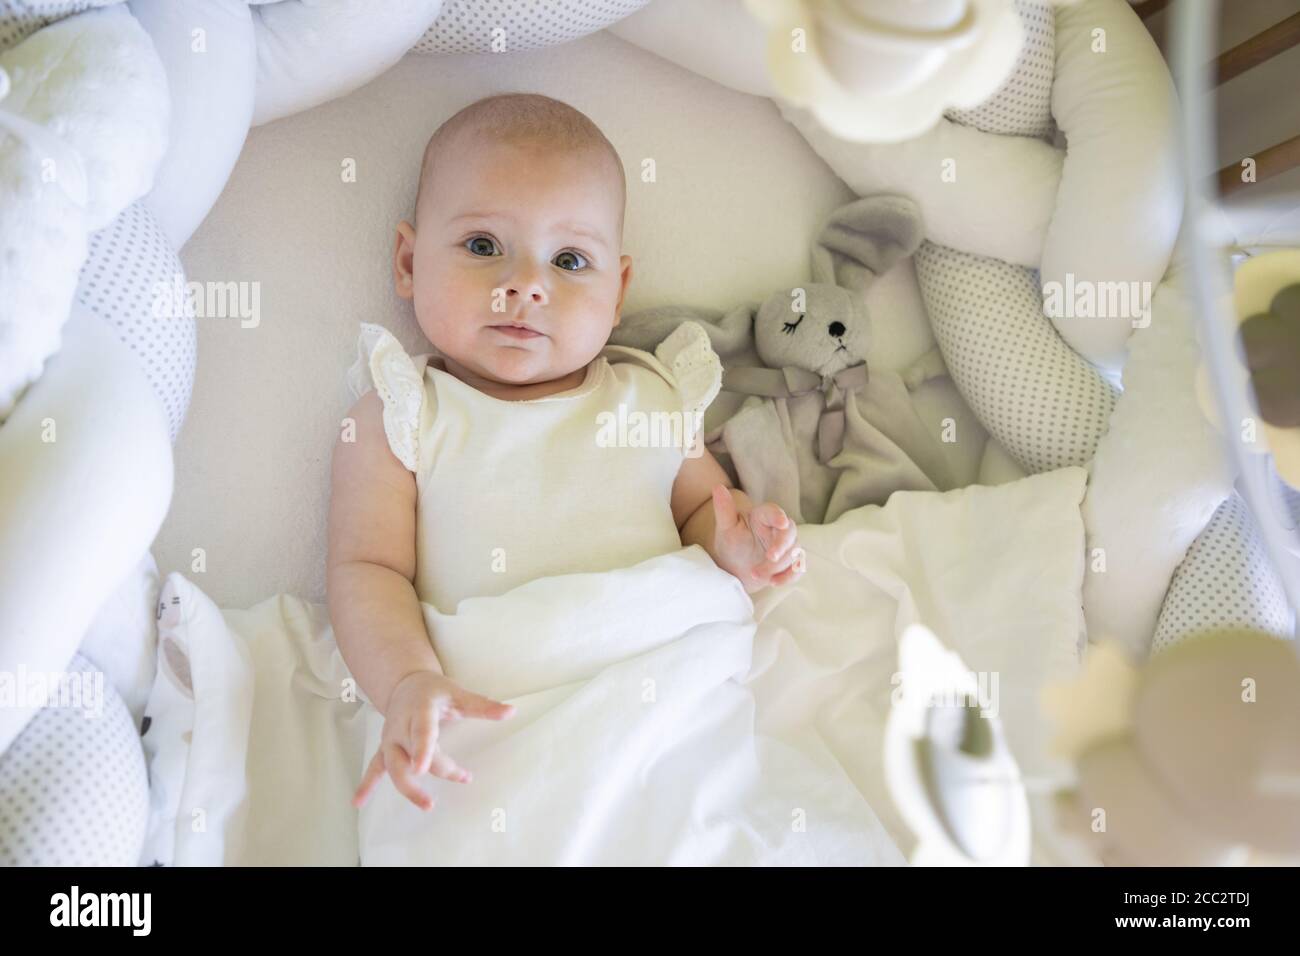 Adorable smiling baby girl with a toy bunny in cot Stock Photo